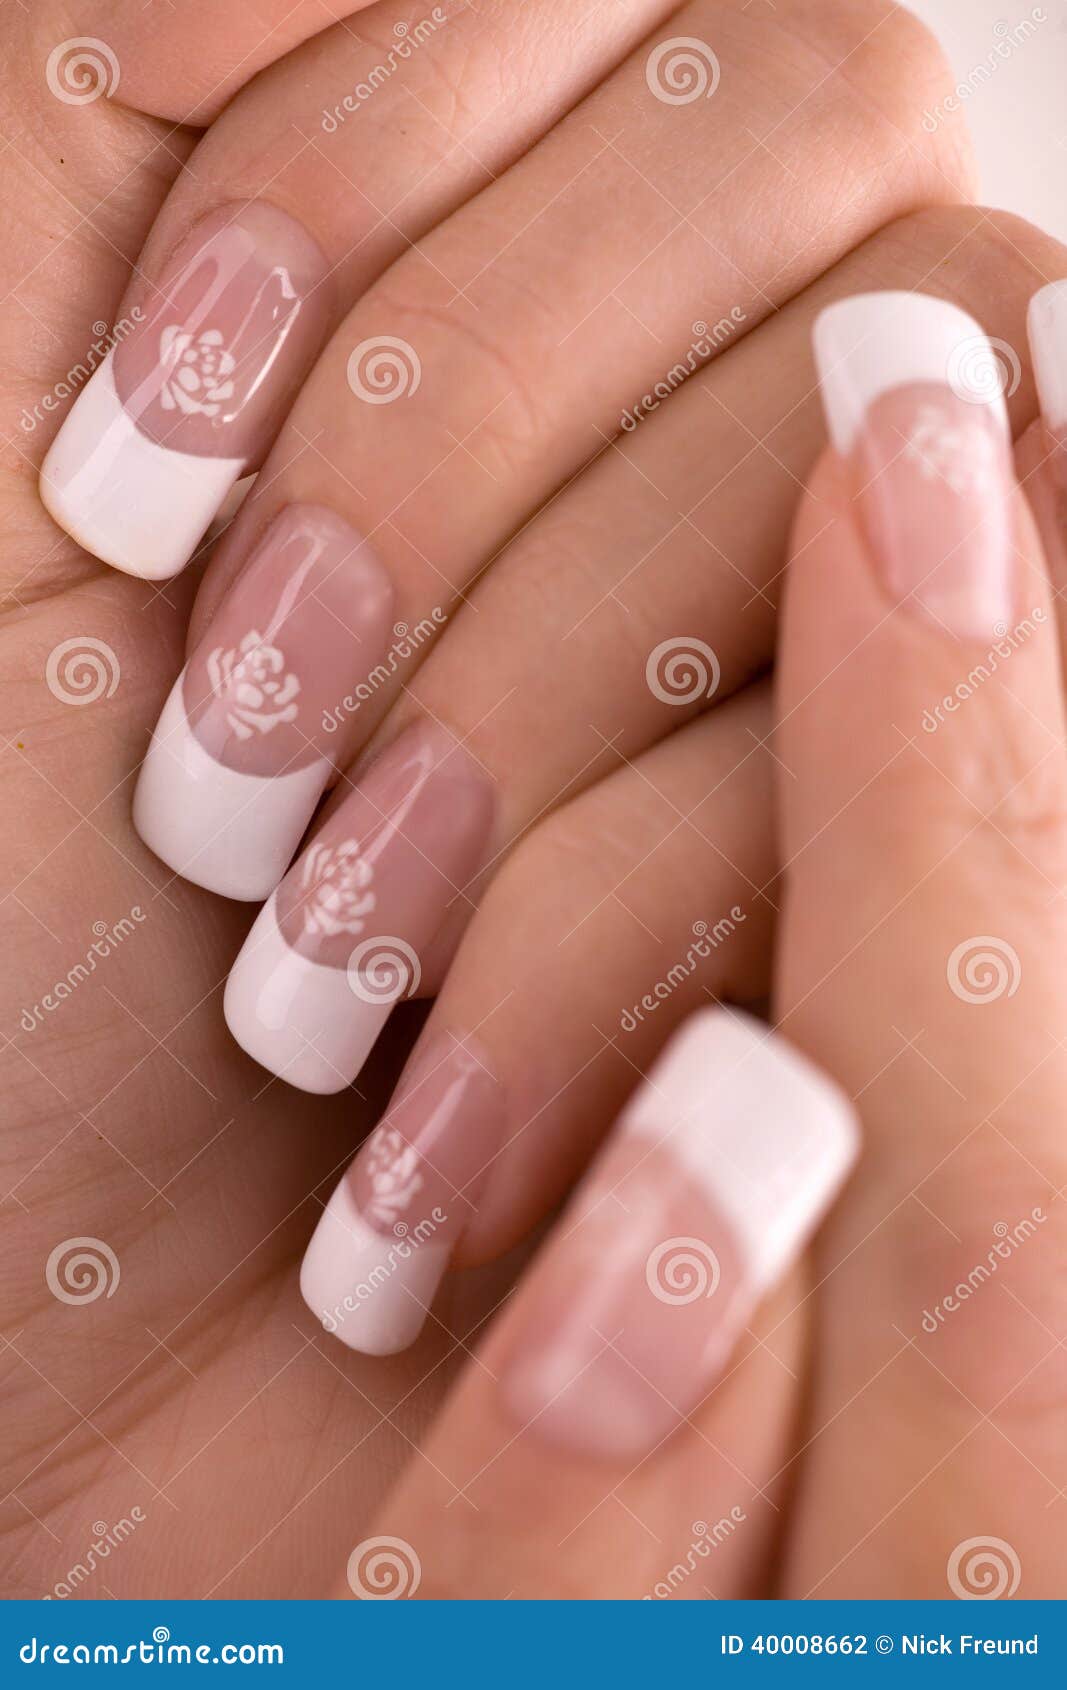 430+ Airbrush Nails Stock Photos, Pictures & Royalty-Free Images - iStock